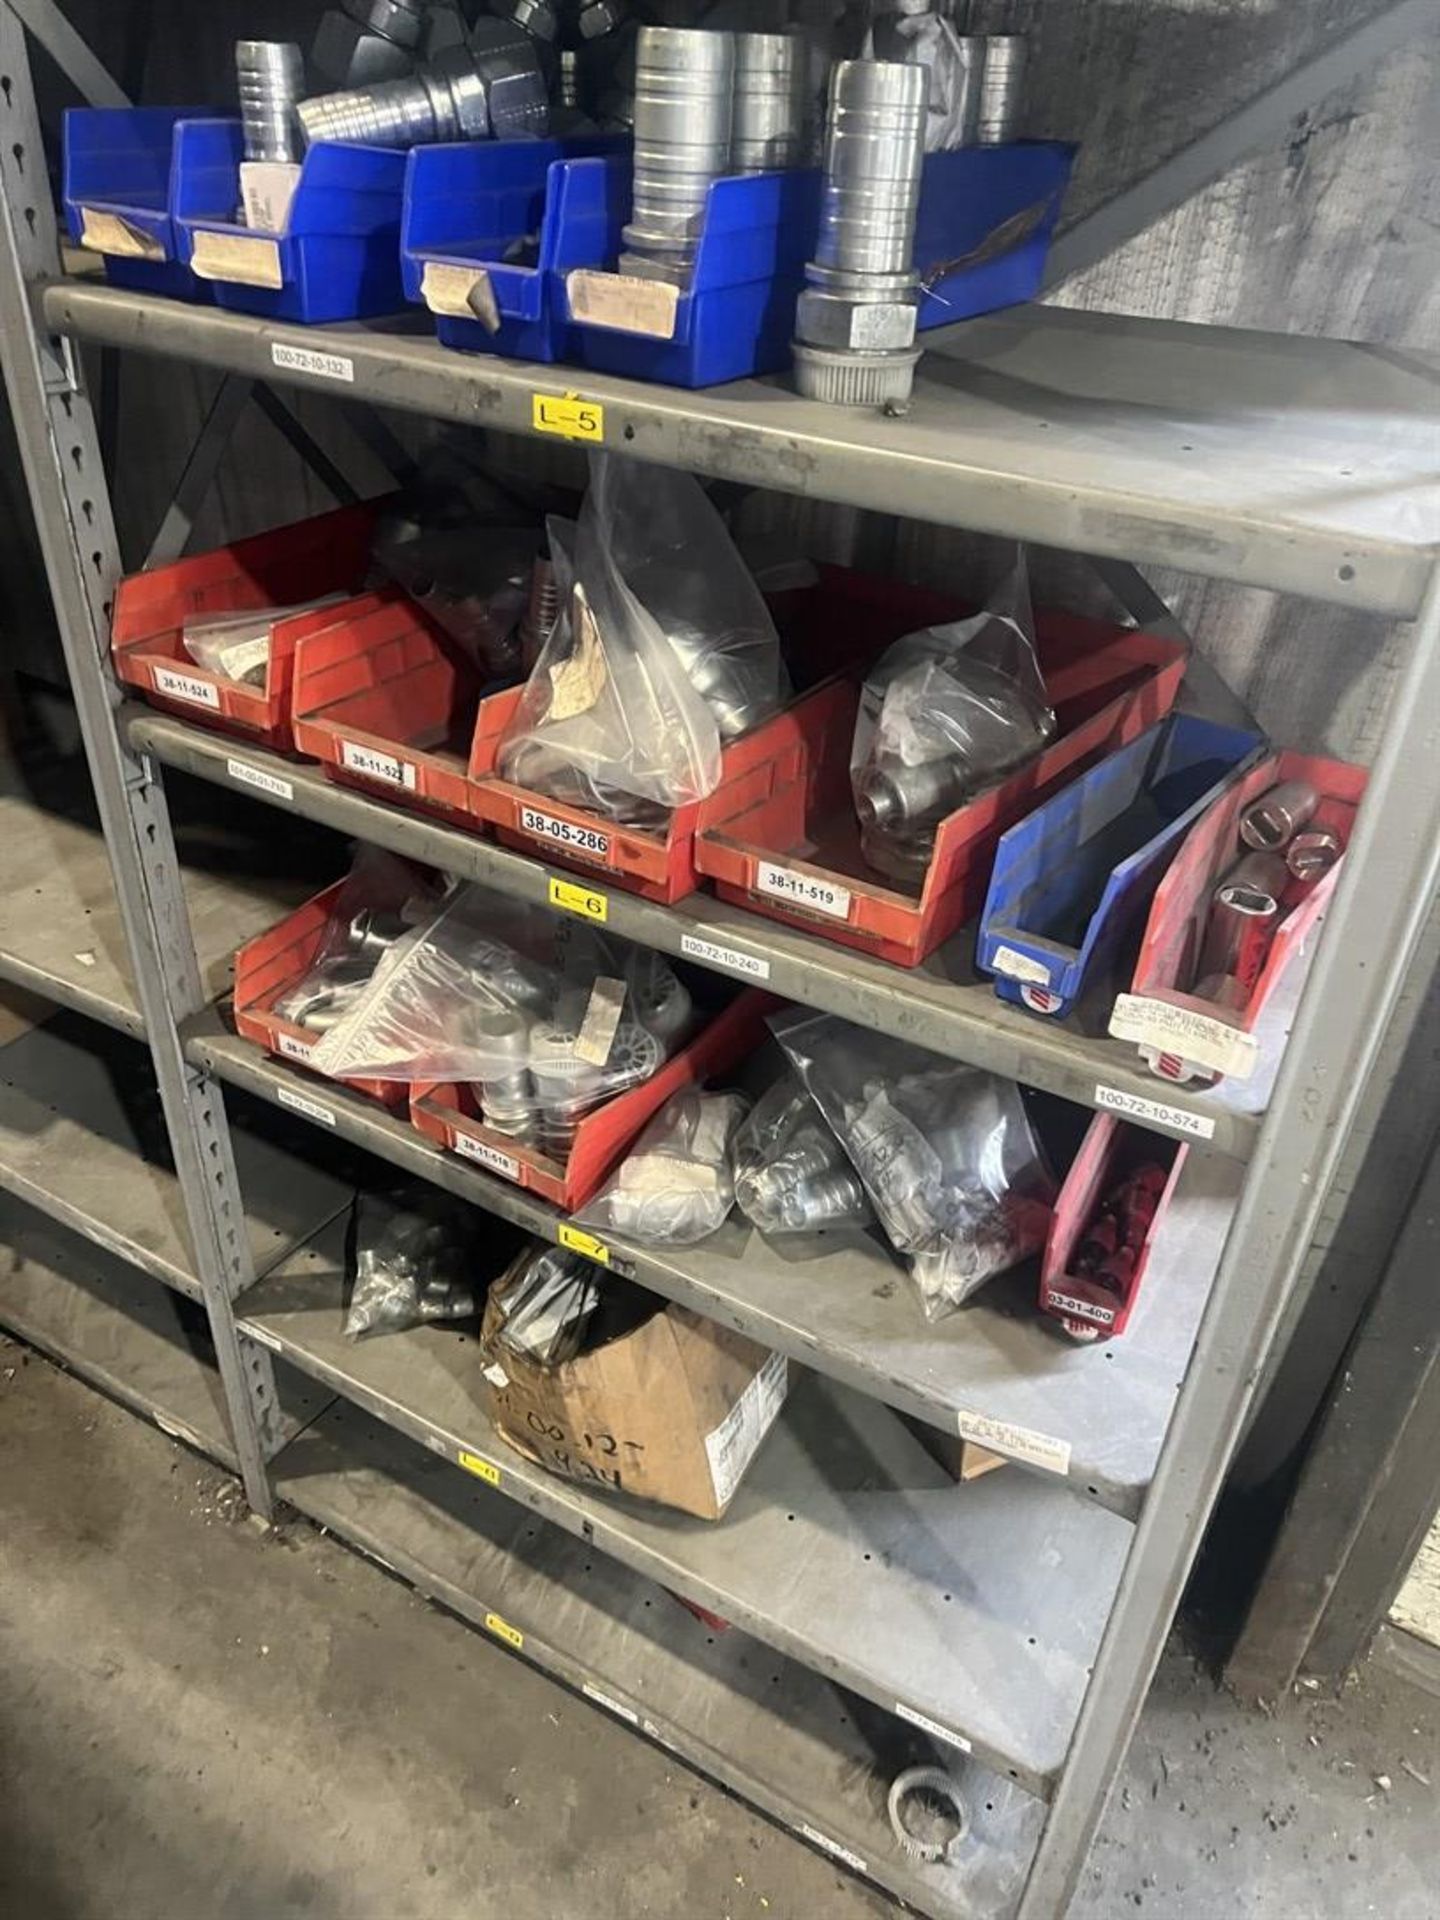 Lot Comprising (11) Shop Shelving Units w/ Contents Including Assorted PPE, Hardware, Chain - Image 3 of 12